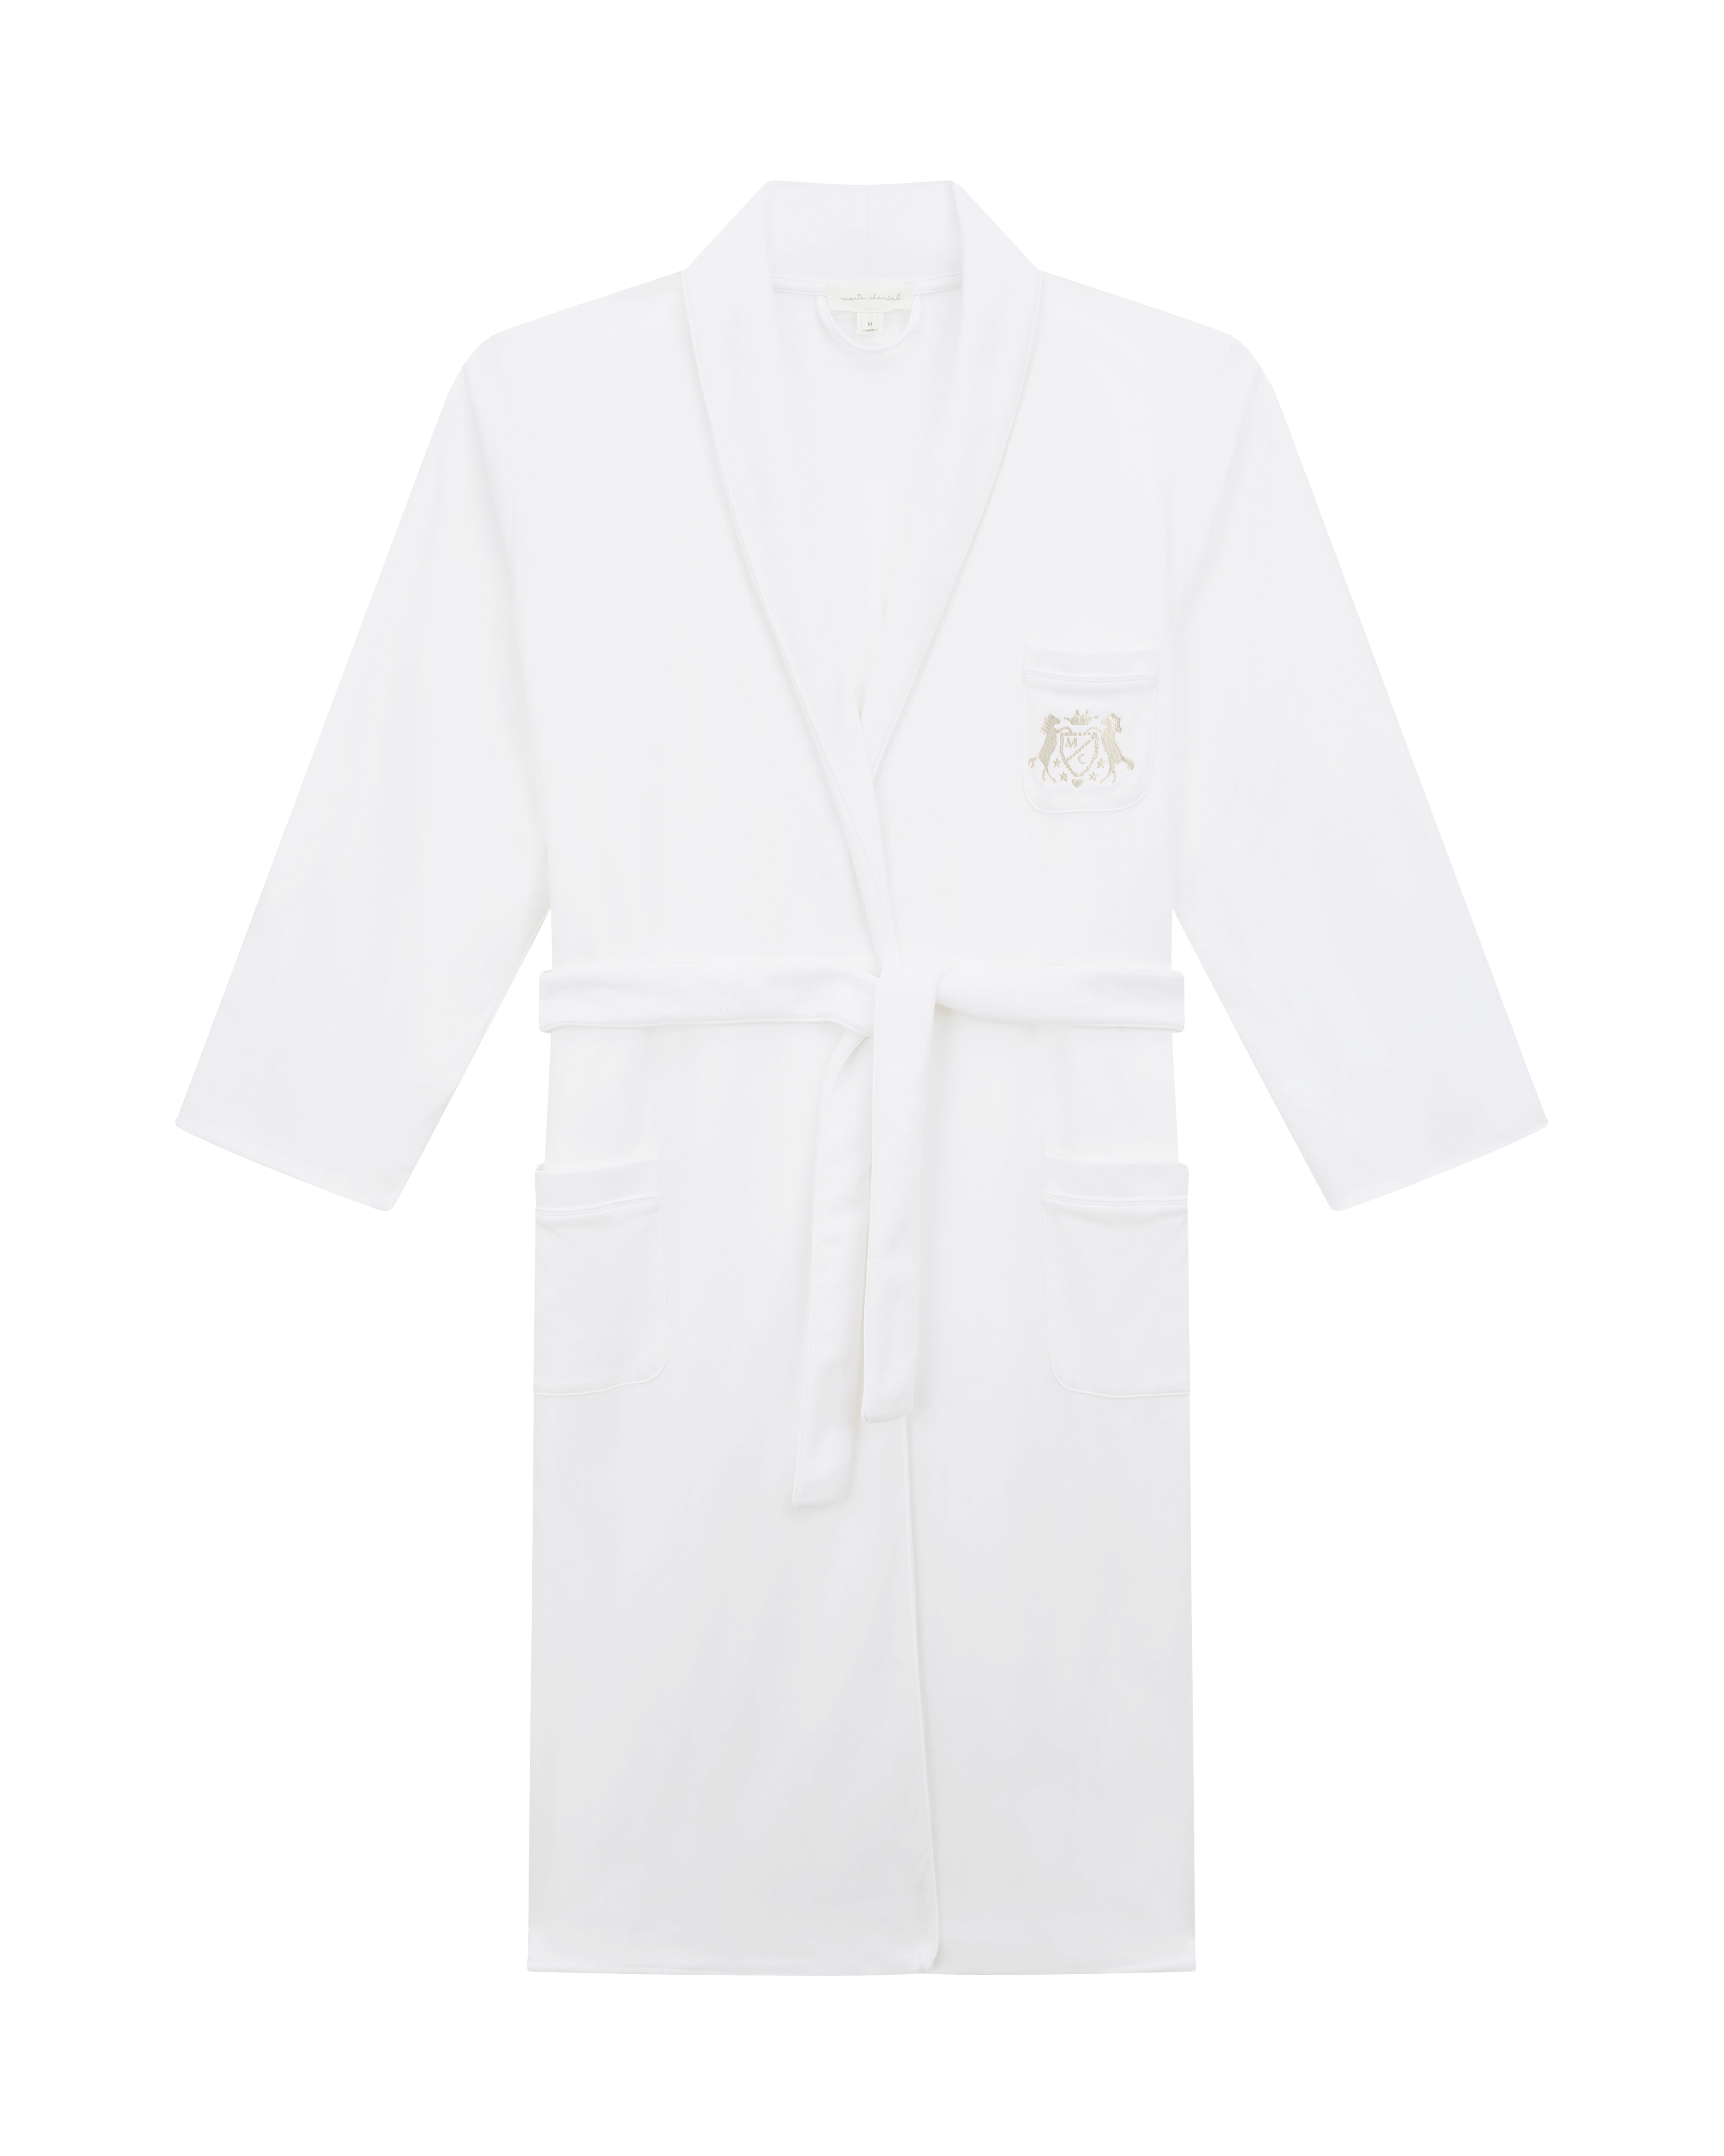 The Crest Robe - Adult